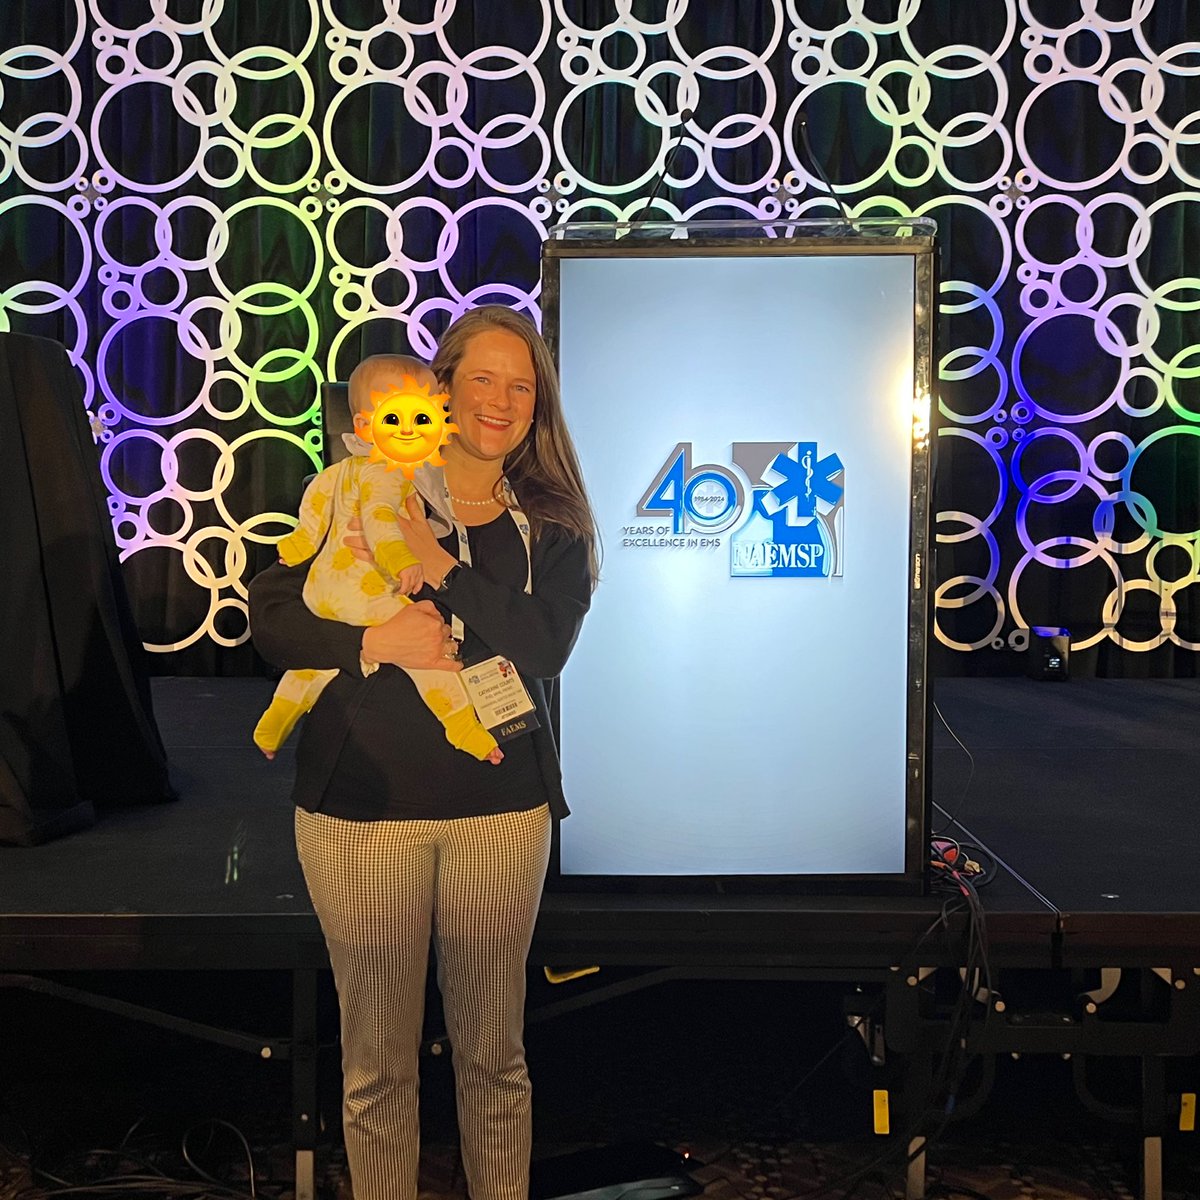 Baby’s second national meeting, saw some posters, crashed some sessions, and even managed to hang for some of the social events. Until next year @NAEMSP! #NAEMSP2024 #UWashEMS